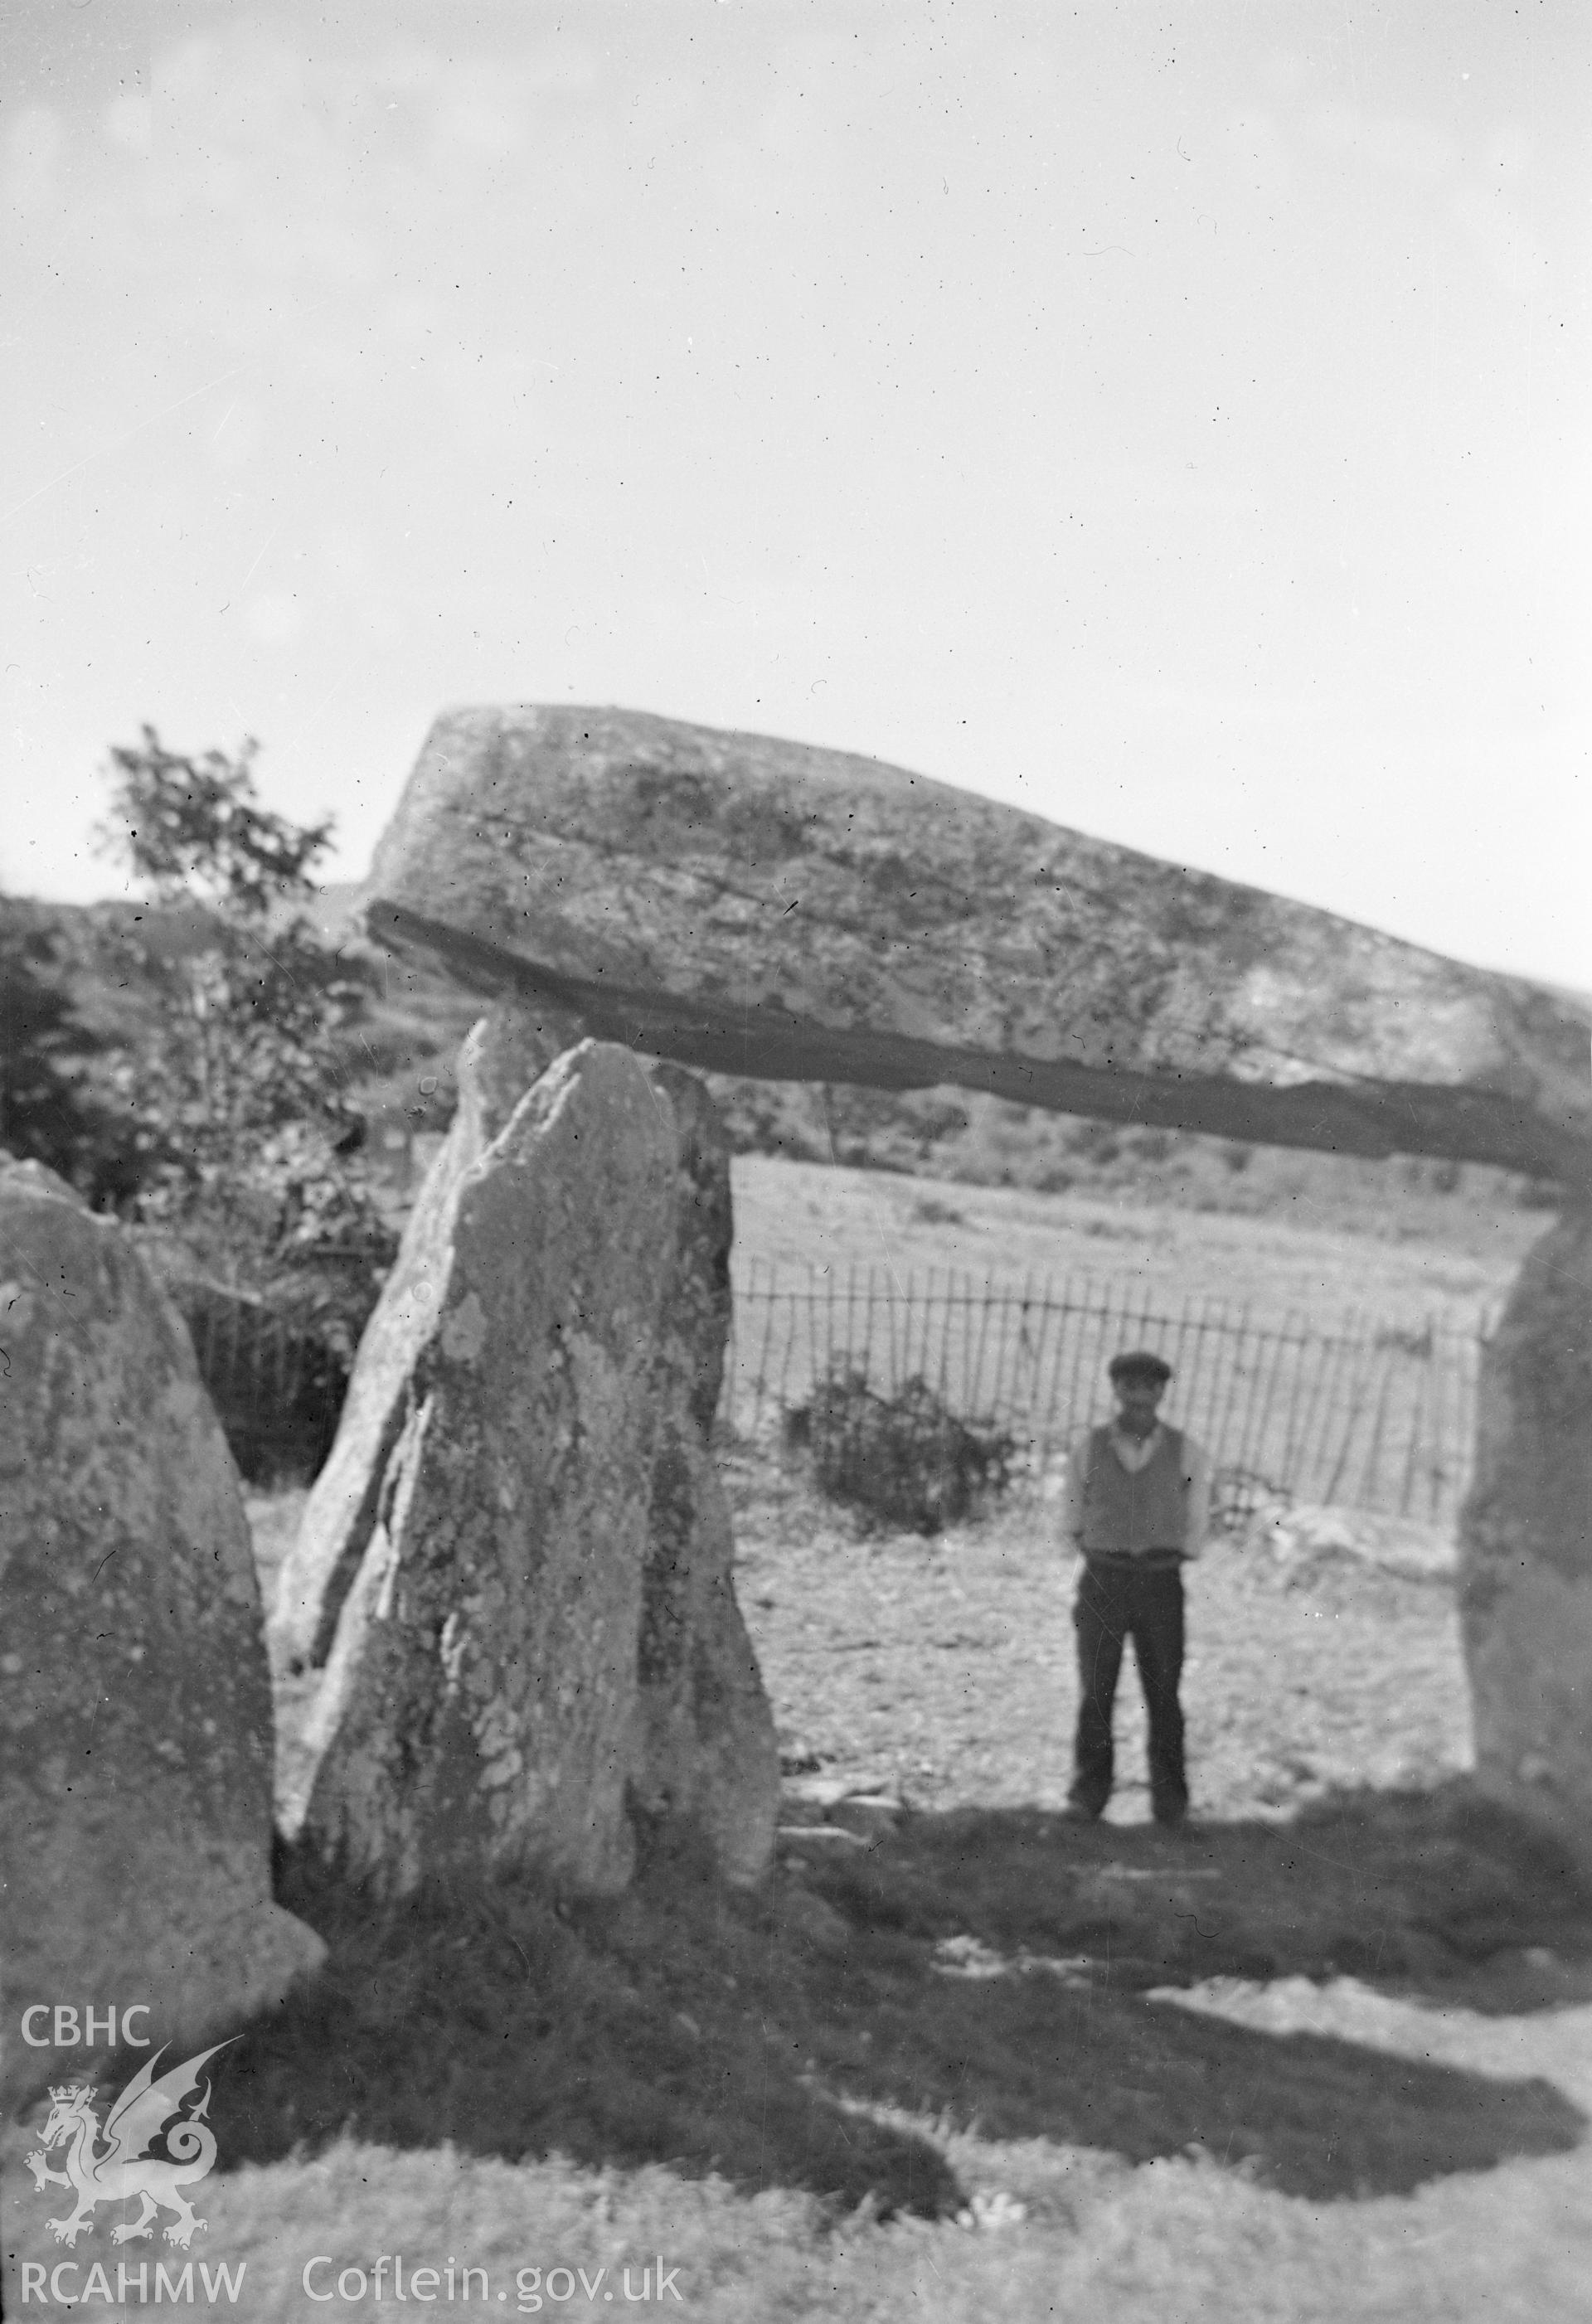 Digital copy of a nitrate negative showing Pentre Ifan Burial Chamber.